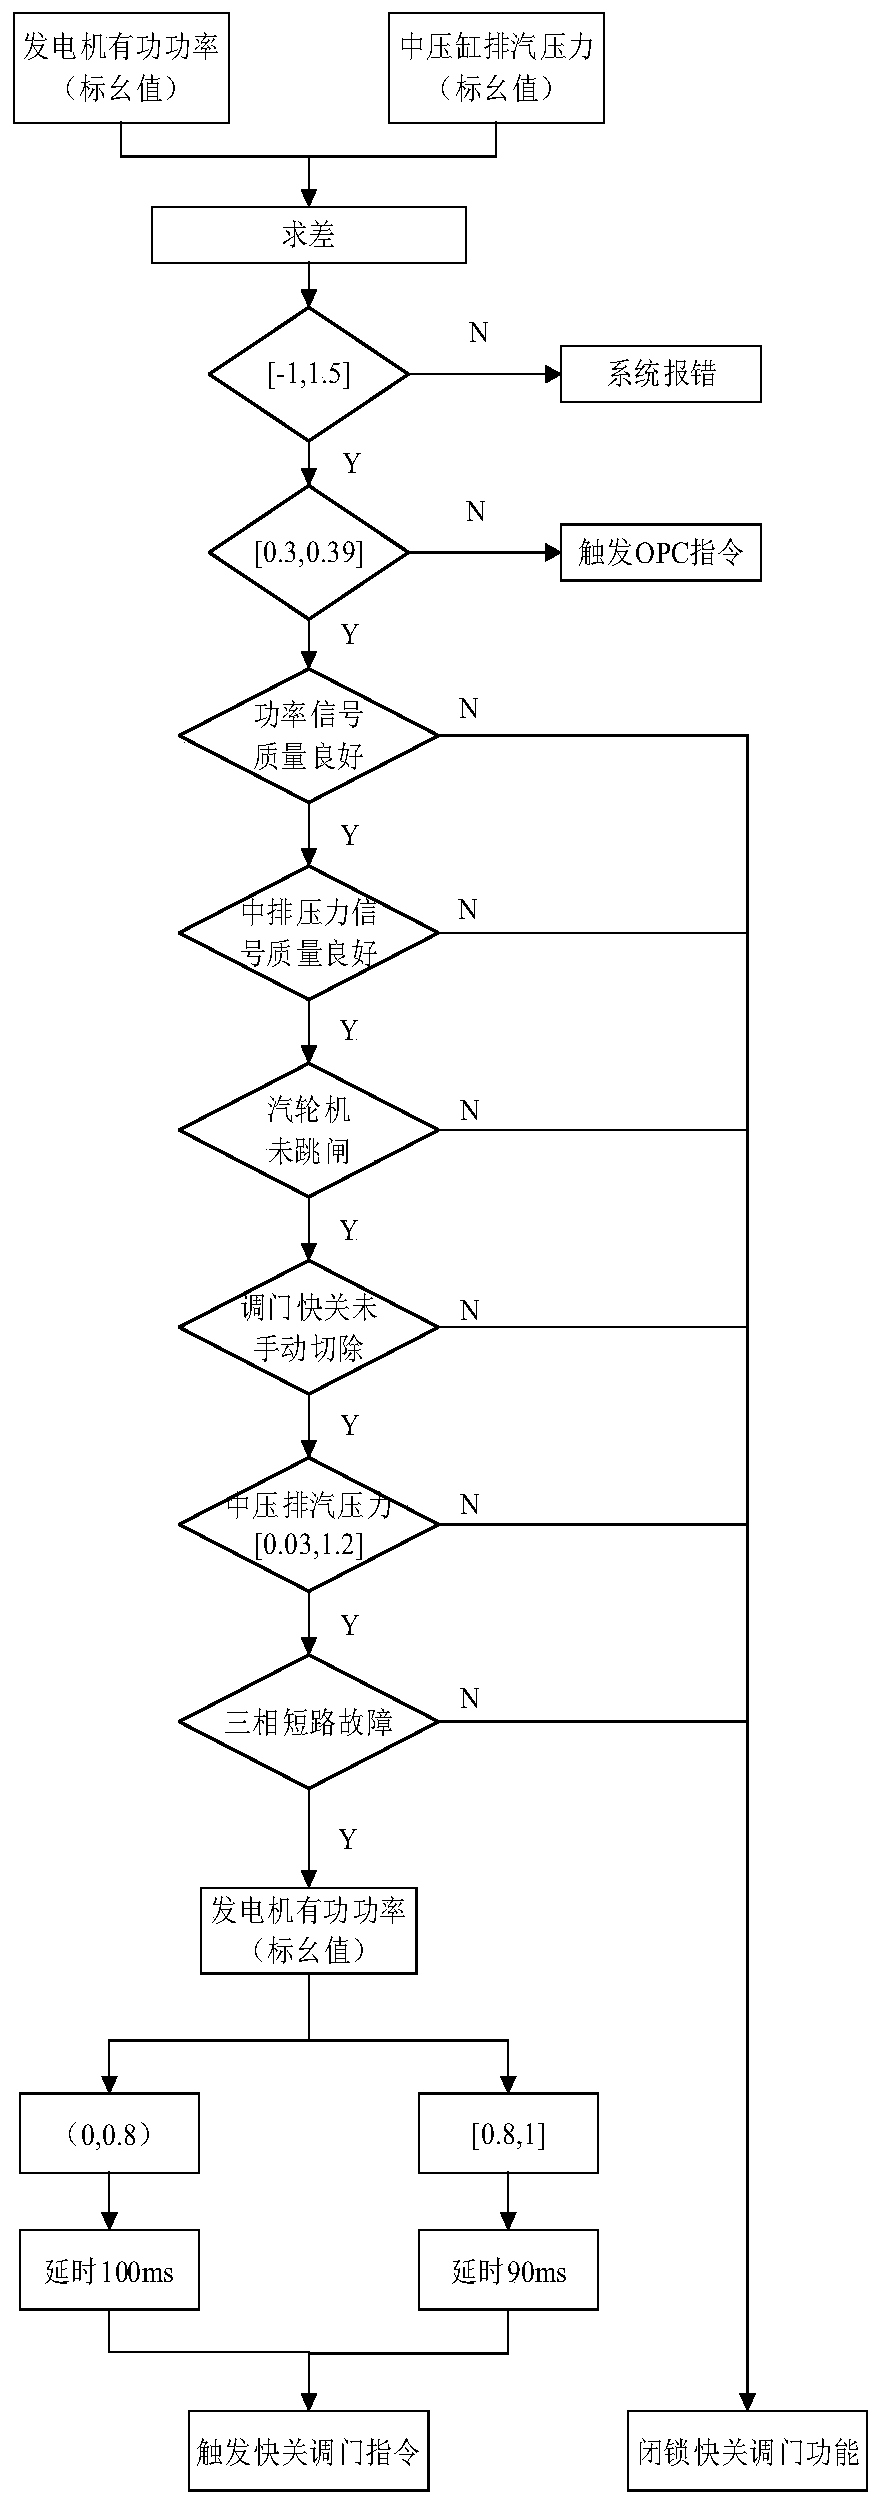 Control Method of Steam Turbine Shutdown and Shutdown System Based on Fault Critical Removal Time